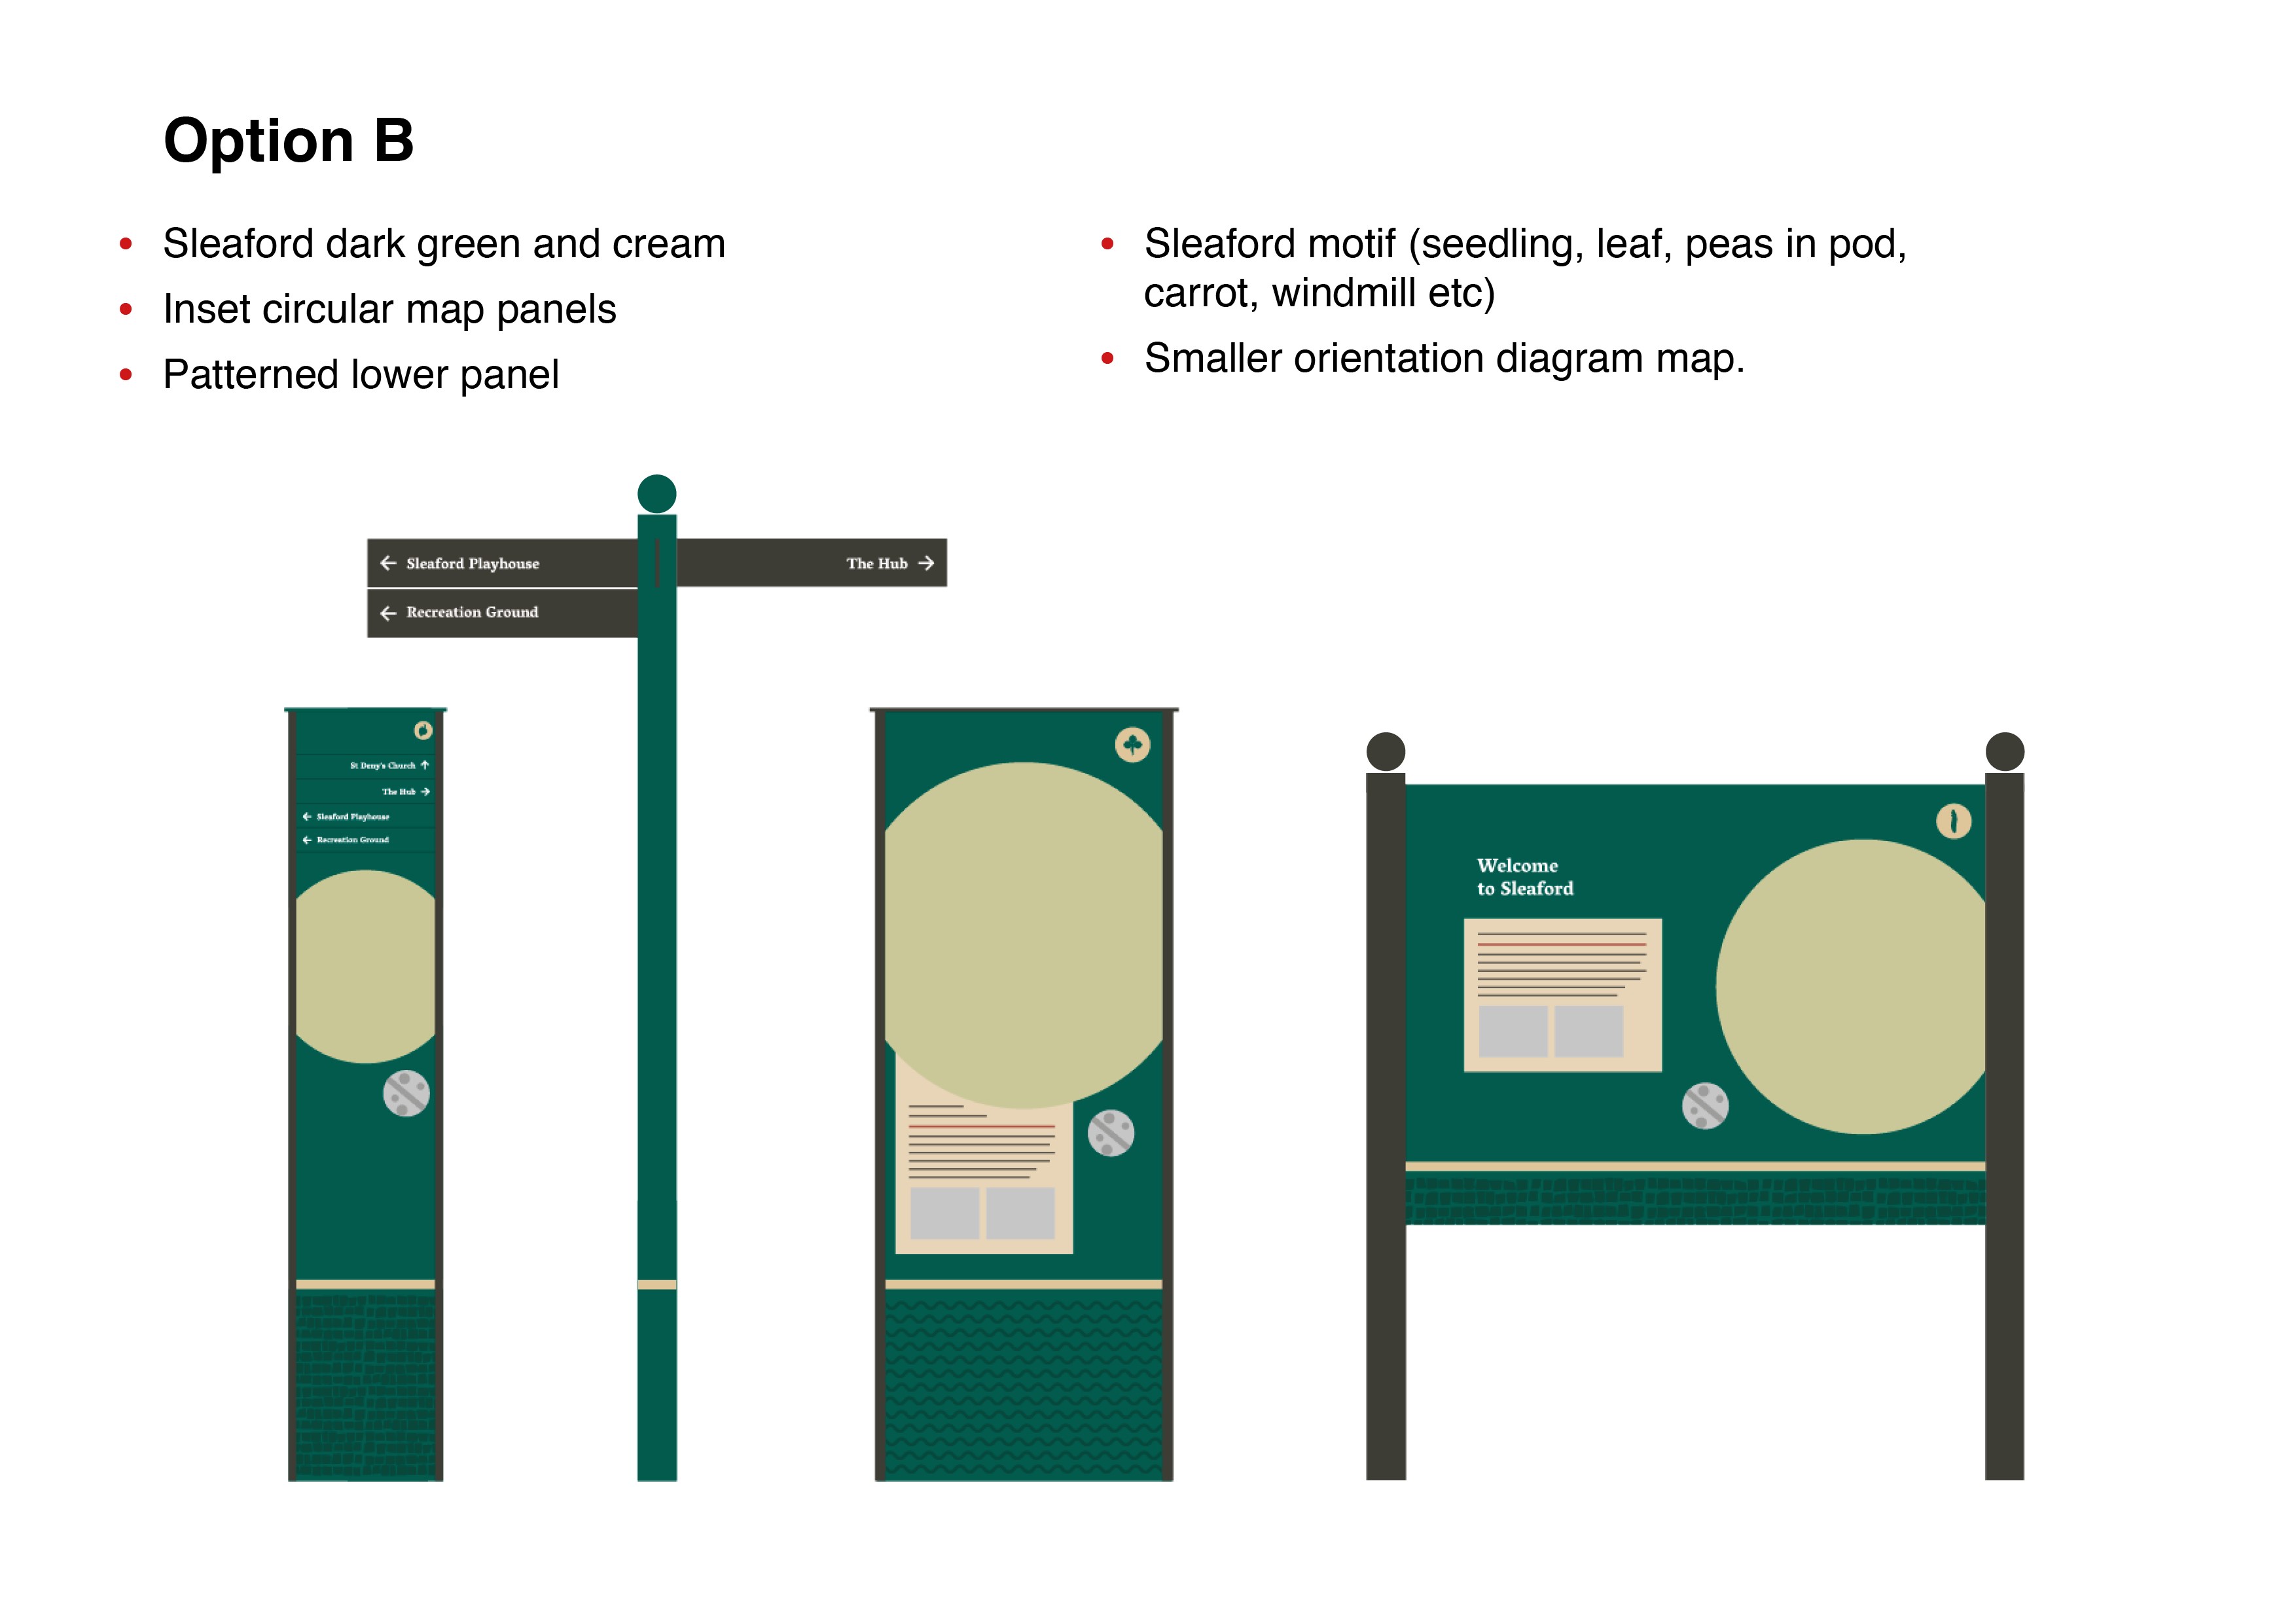 Option B  -	Sleaford dark green and cream  -	Inset circular map panels  -	Patterned lower panel  -	Seaford motif (seeding, leaf, peas in a pod, carrot, windmill etc) -	Smaller orientation diagram map 